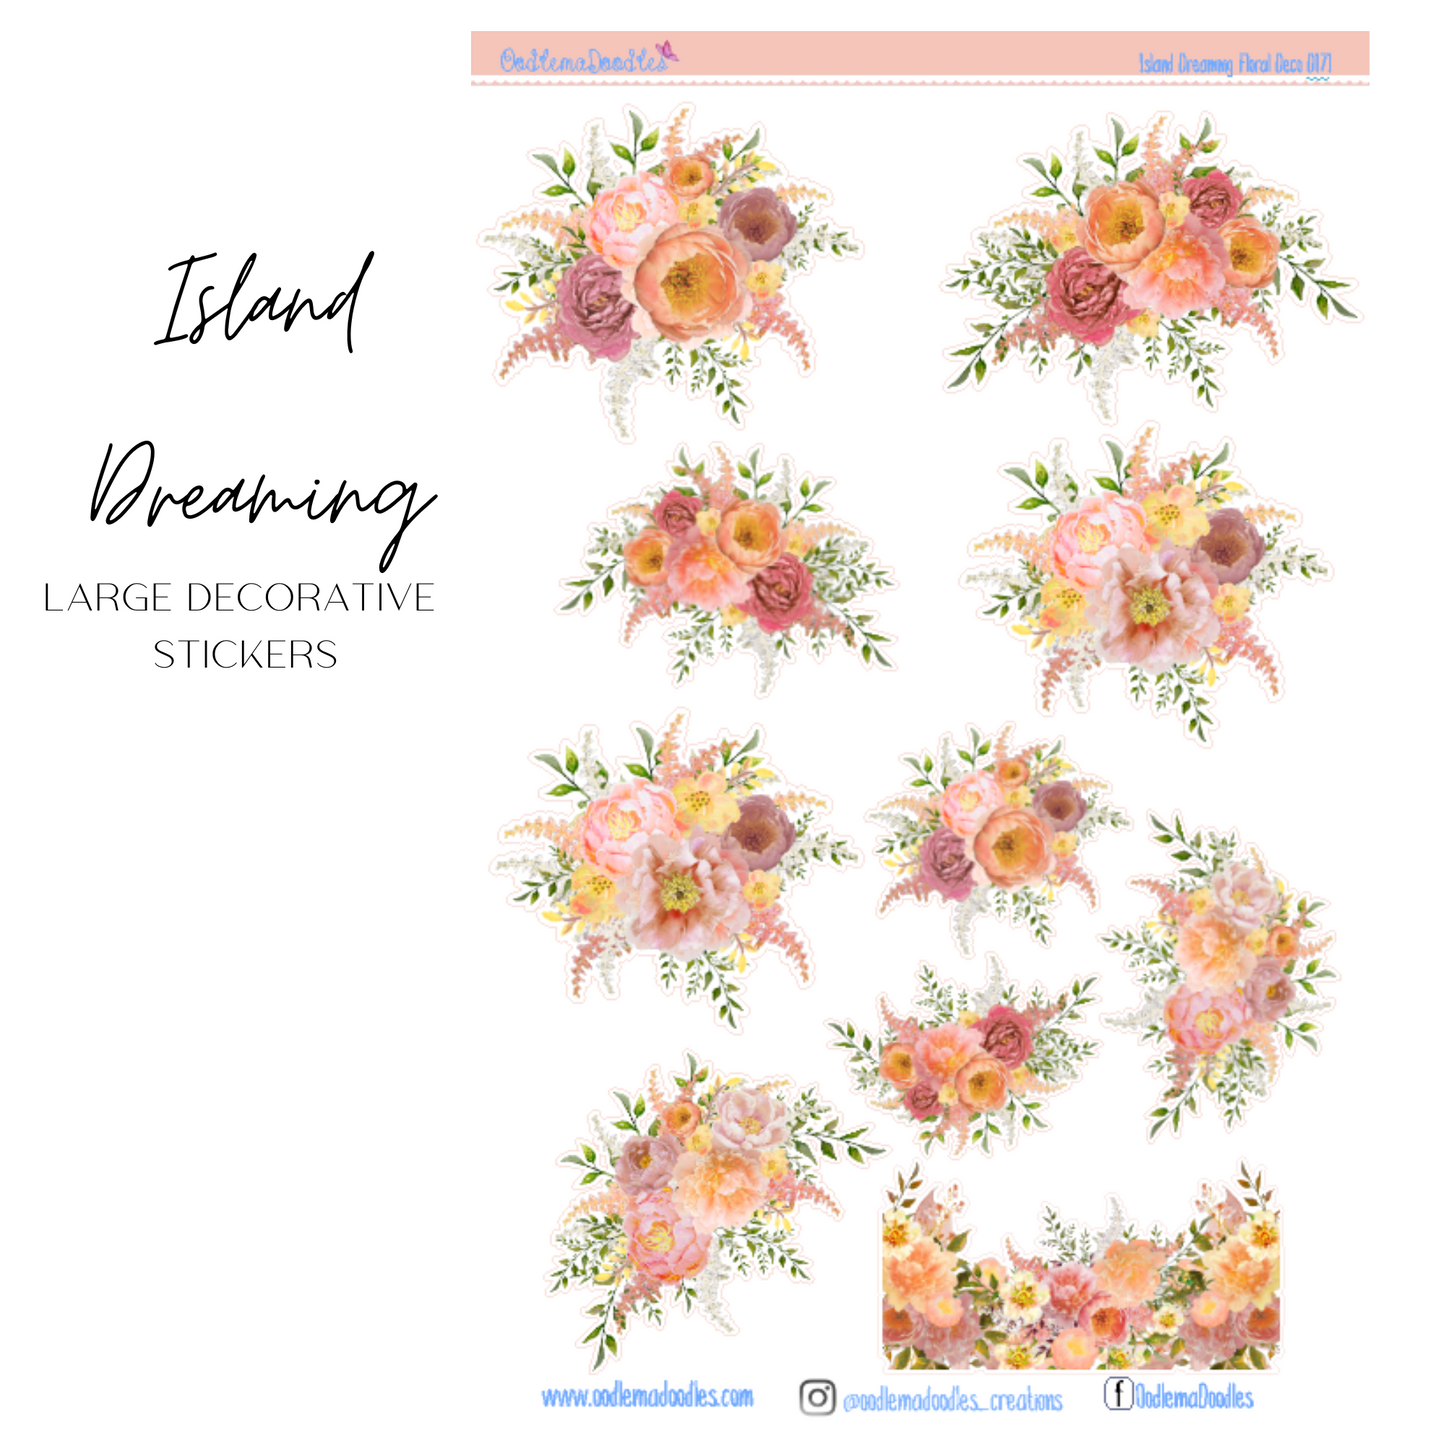 Island Dreaming Flower Large Decorative Planner Stickers